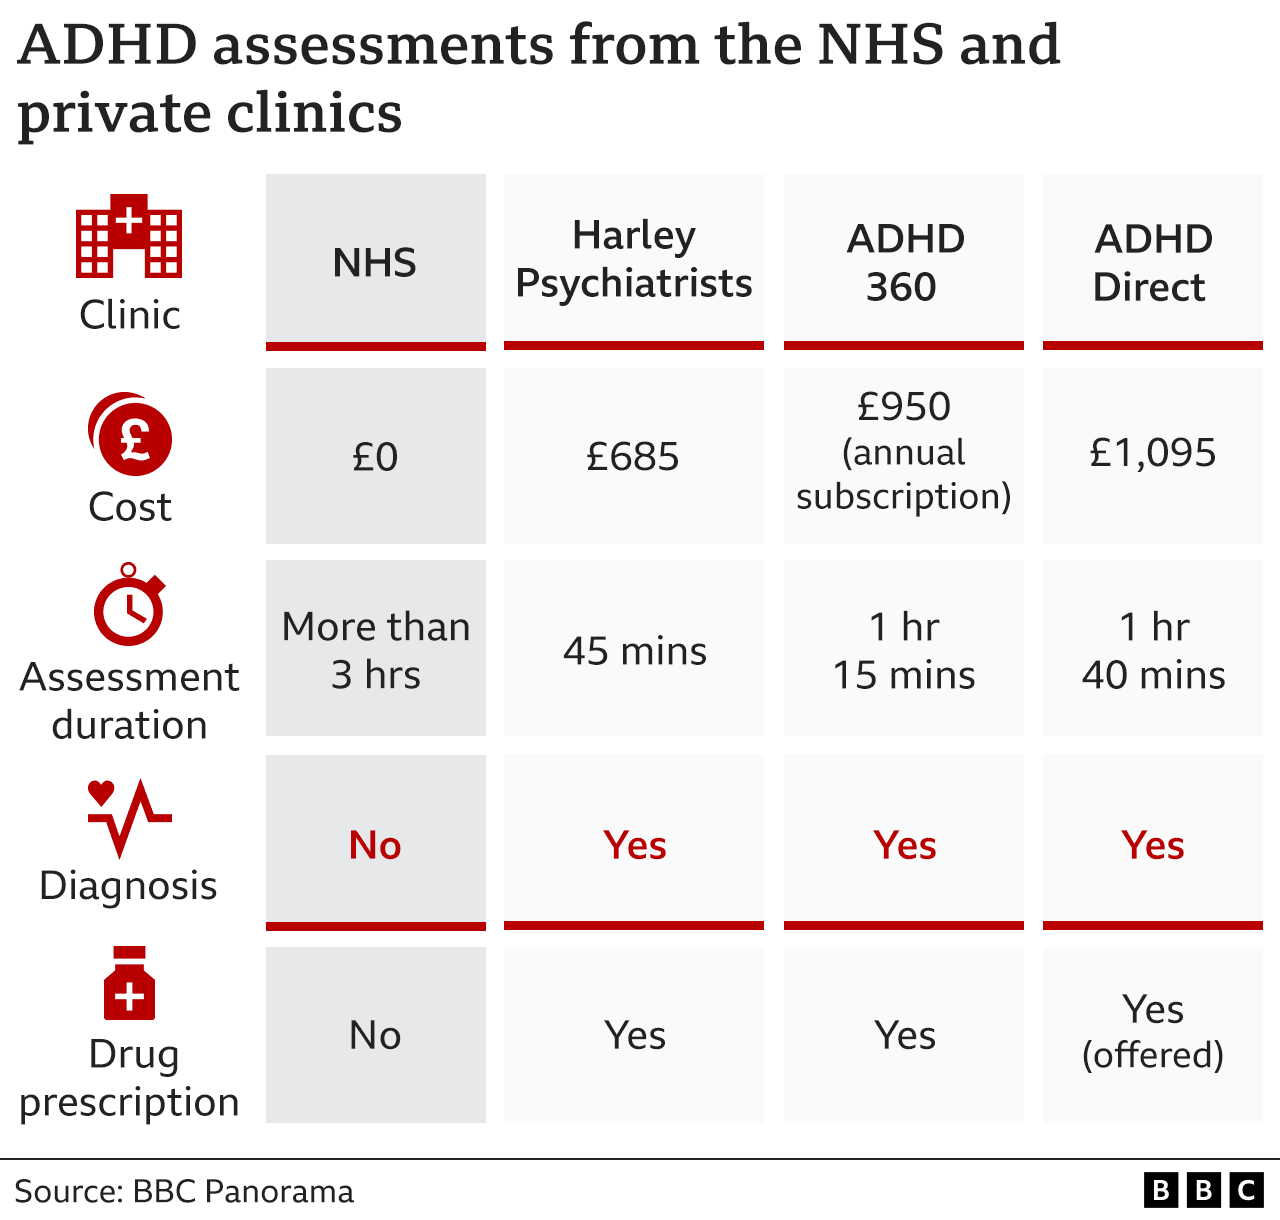 ADHD assessments from the NHS and private clinics.